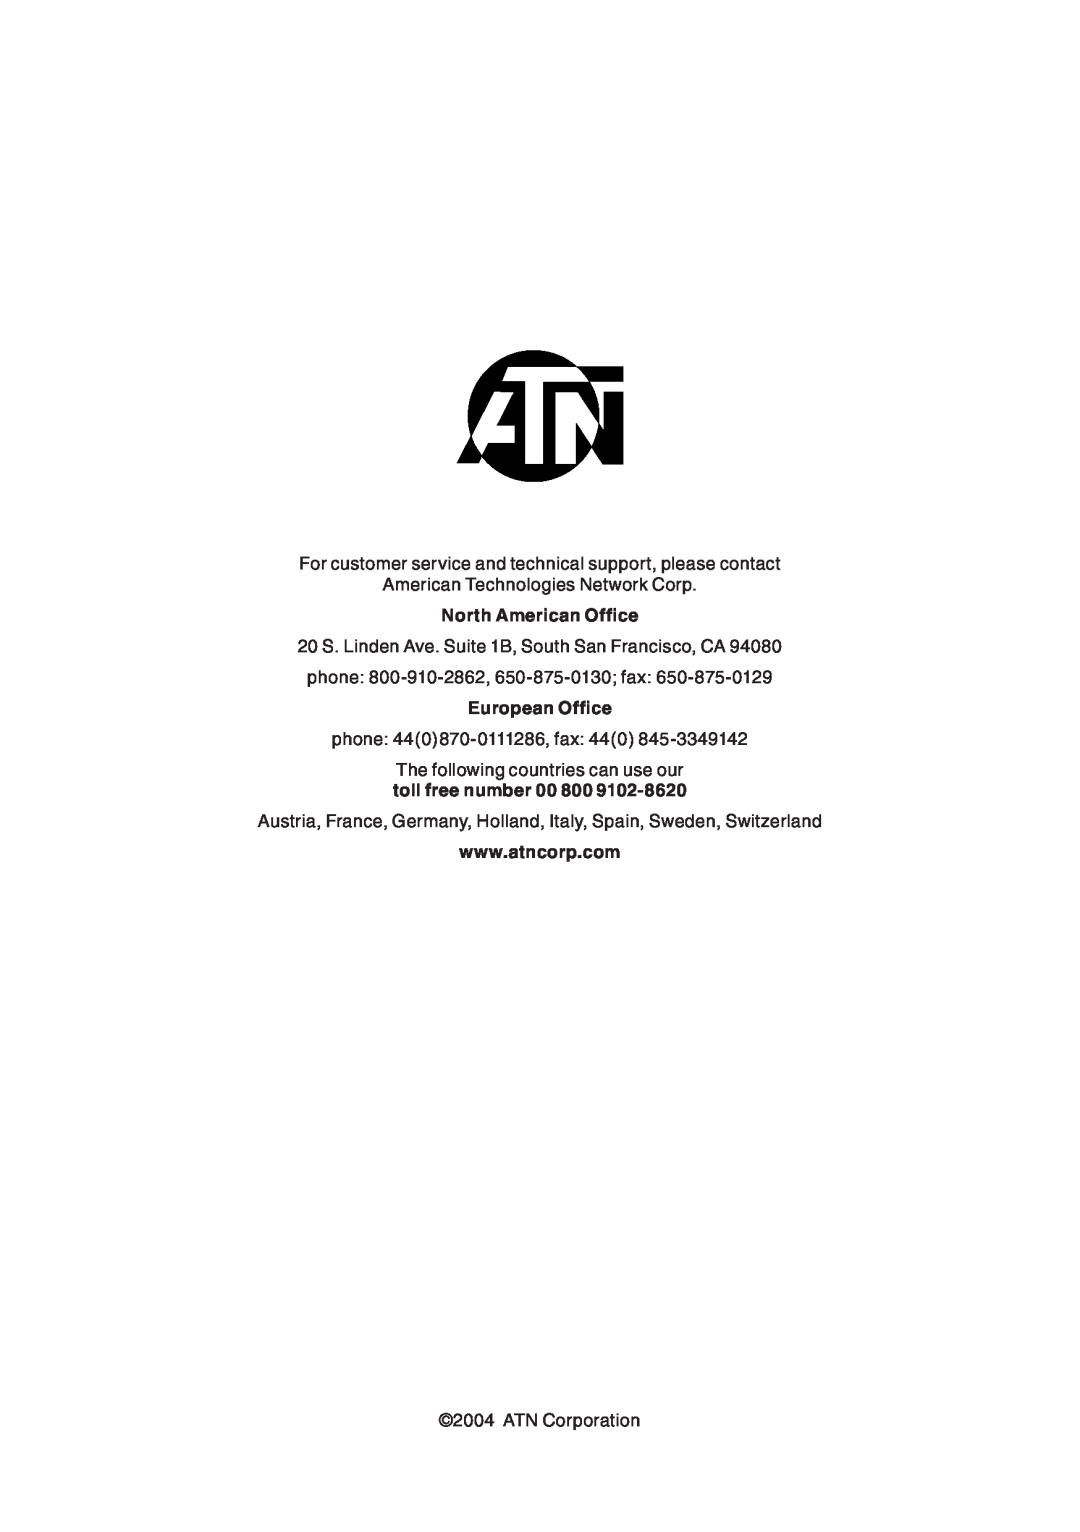 ATN ATN Aries 7900 manual For customer service and technical support, please contact, American Technologies Network Corp 